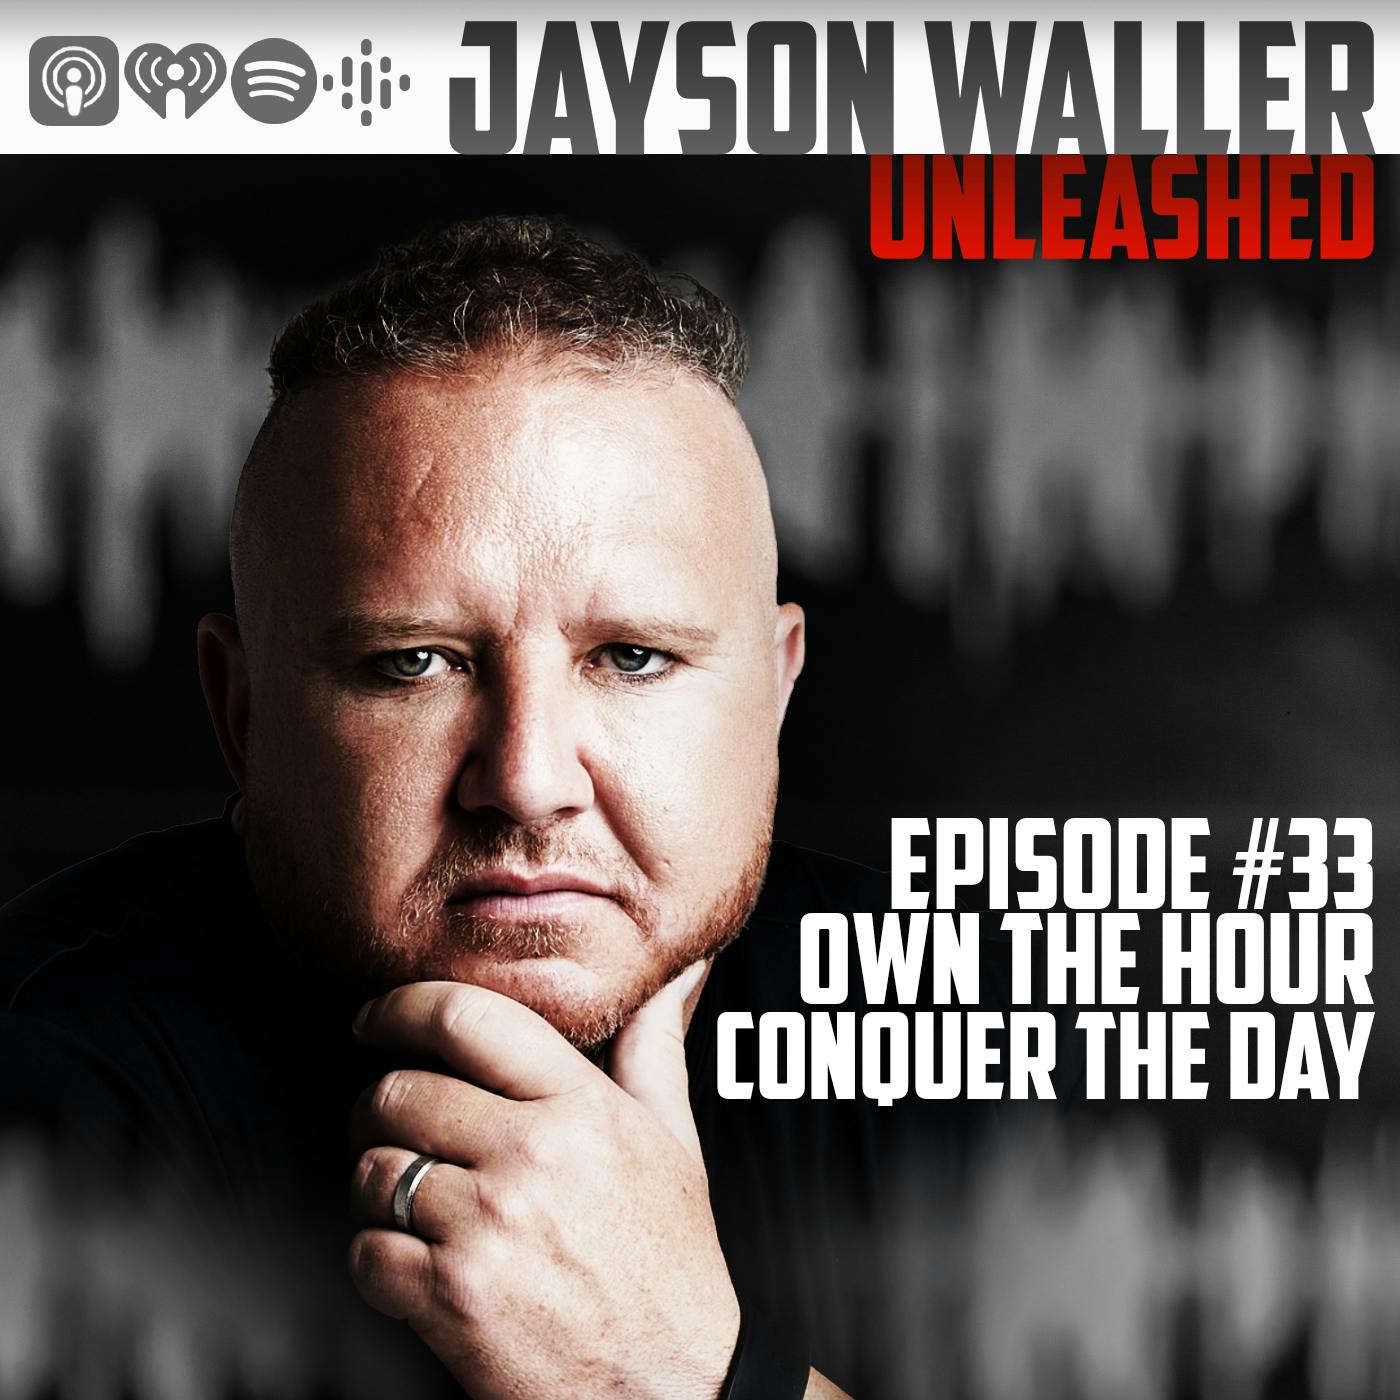 #33 OWN THE HOUR - CONQUER THE DAY